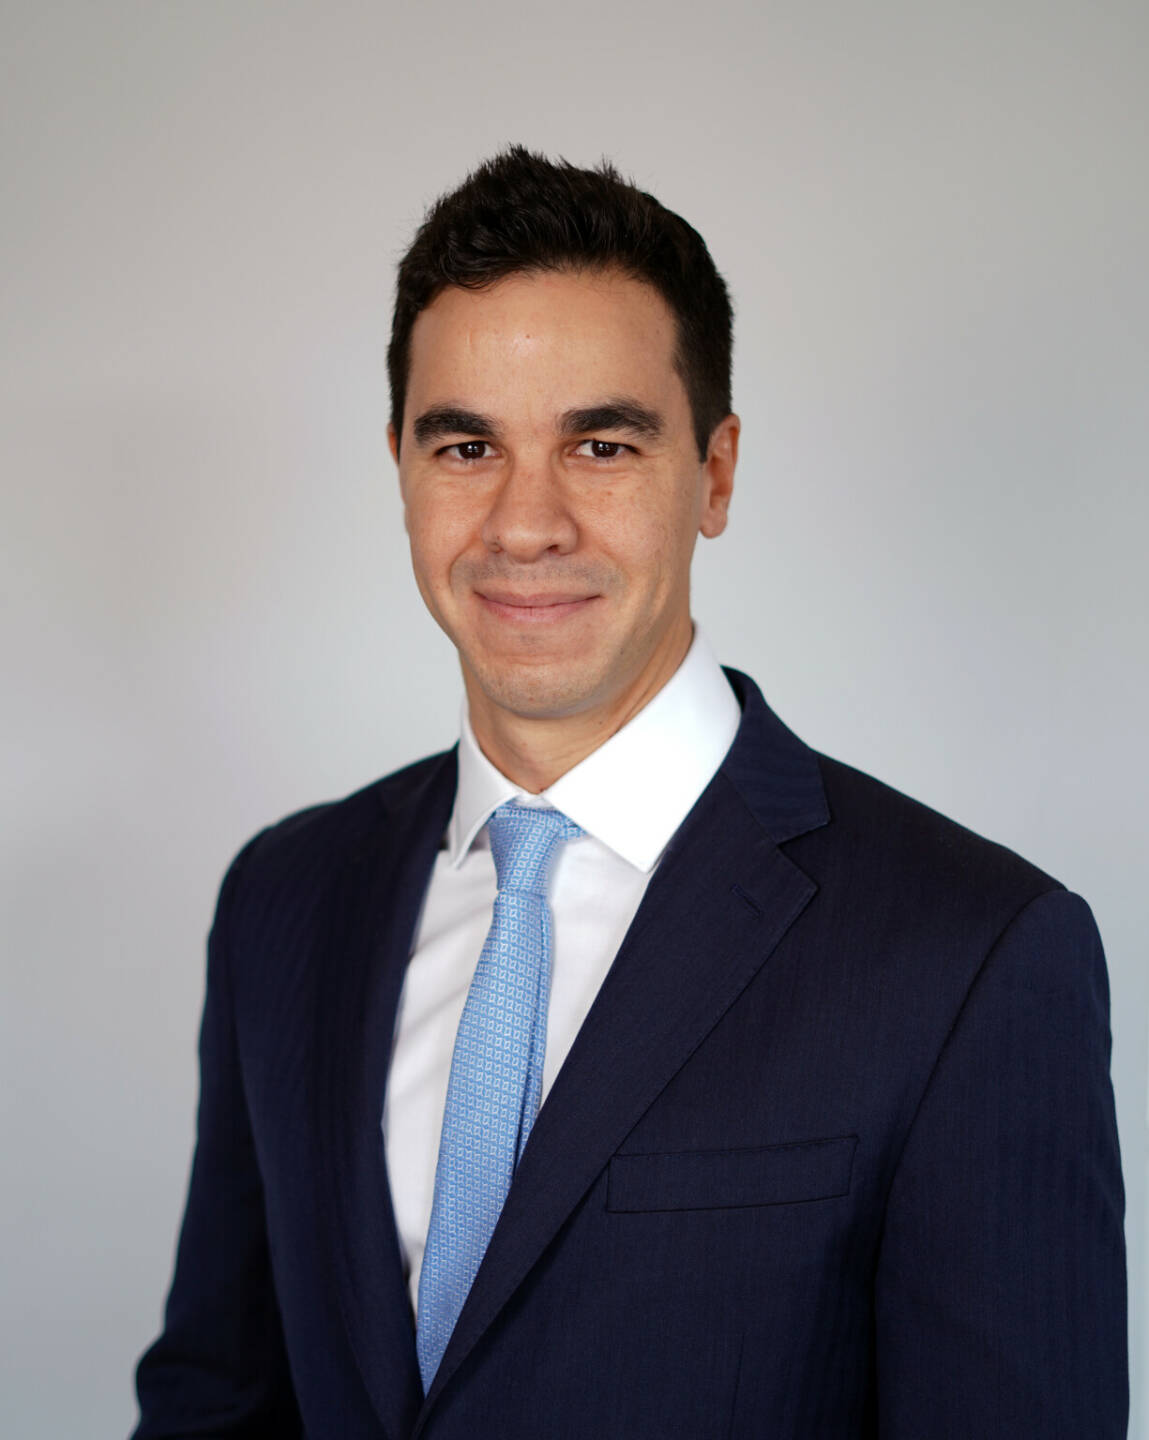 Paulo Salazar, Head of Emerging Markets Equity bei Candriam; Credit: Candriam 